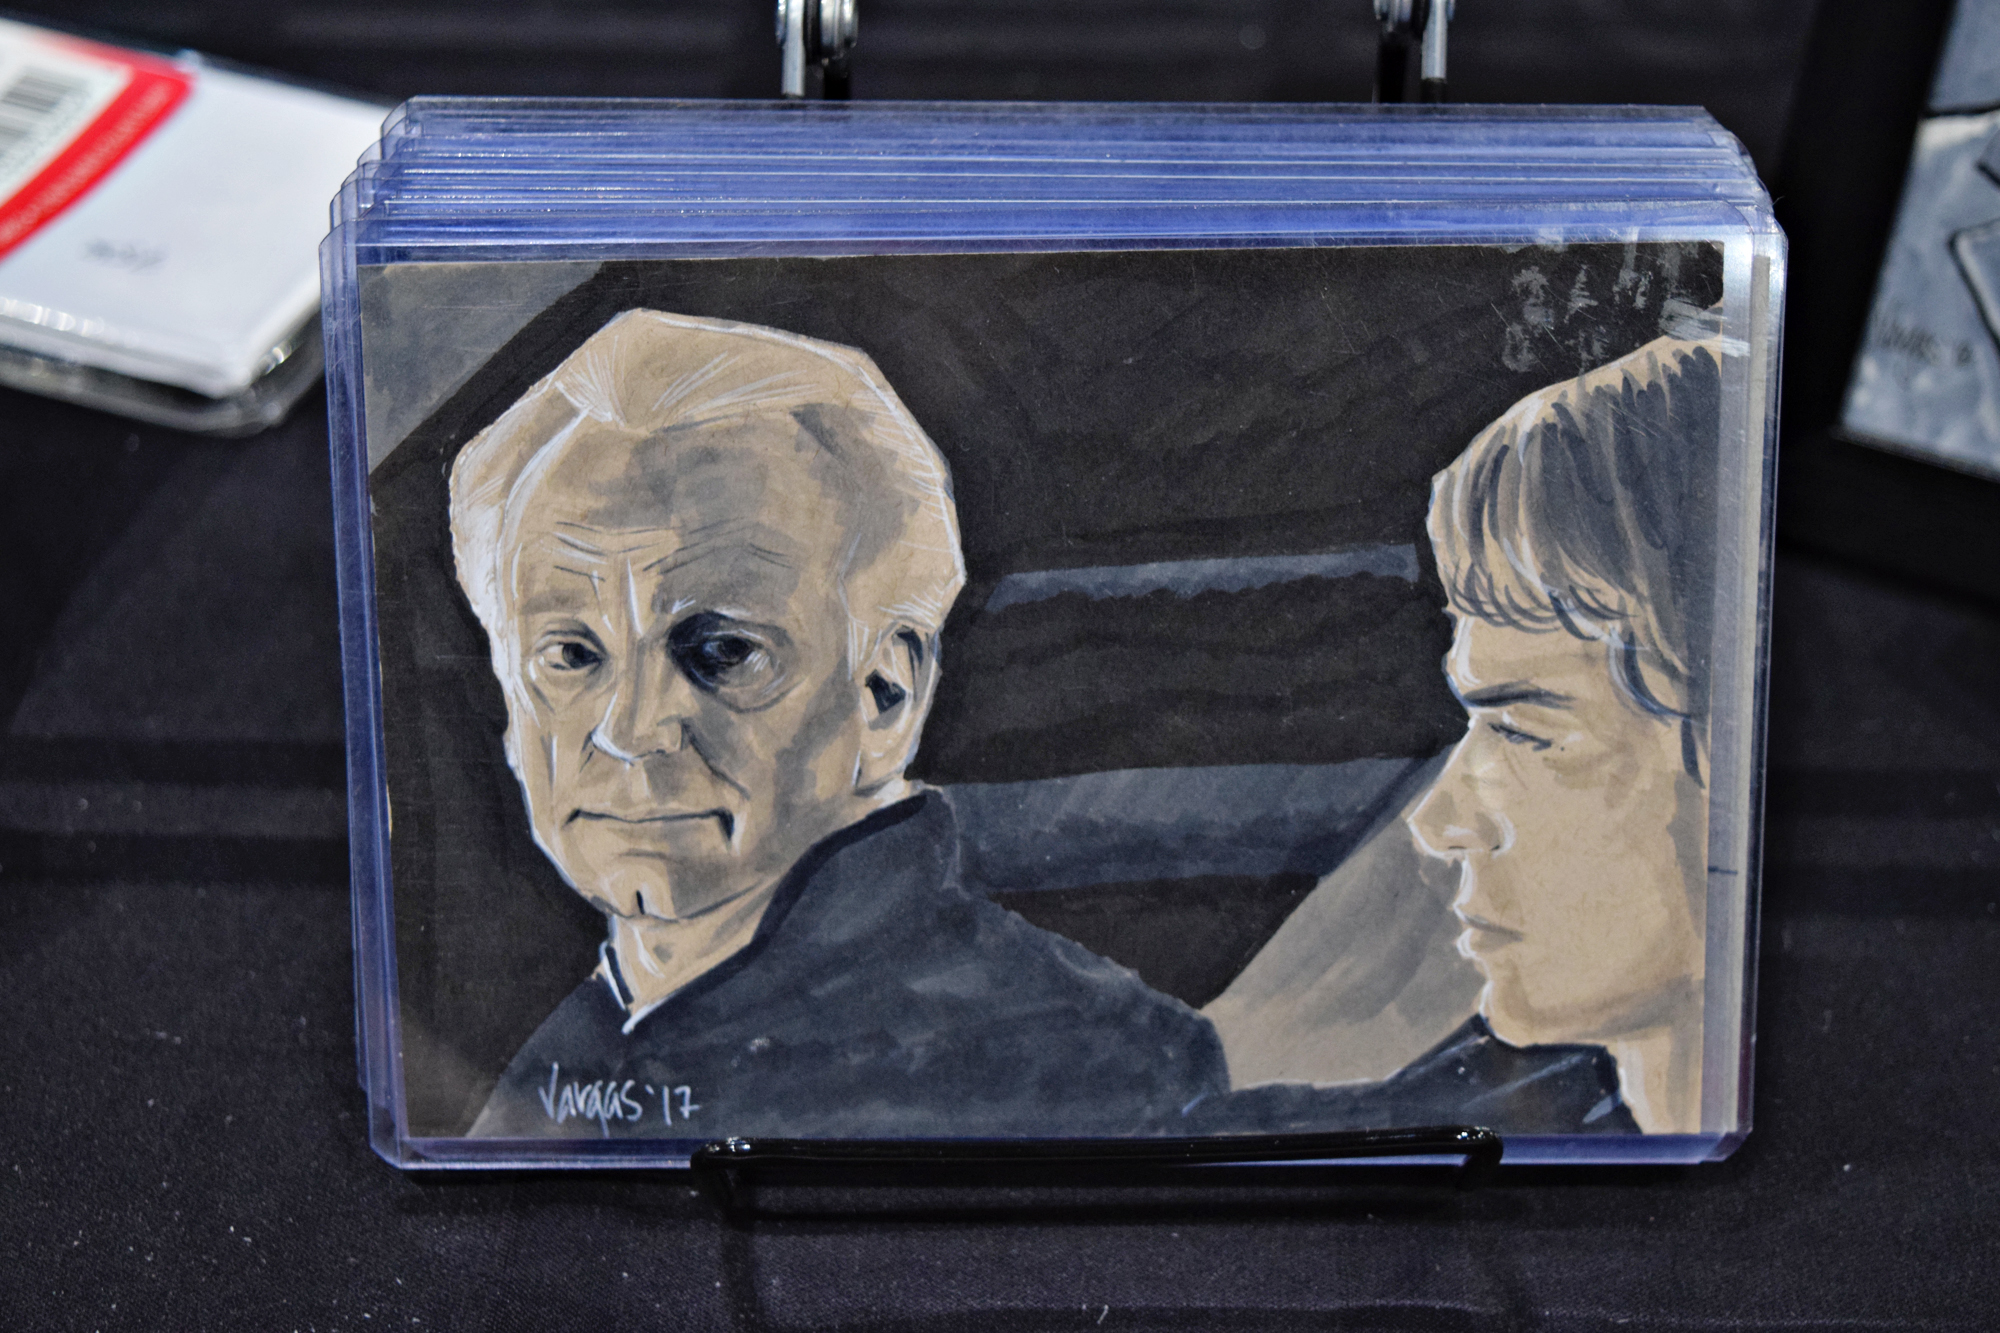 Star Wars Fan Creations at L.A. Comic Con 2018 | Anakin and His Angel